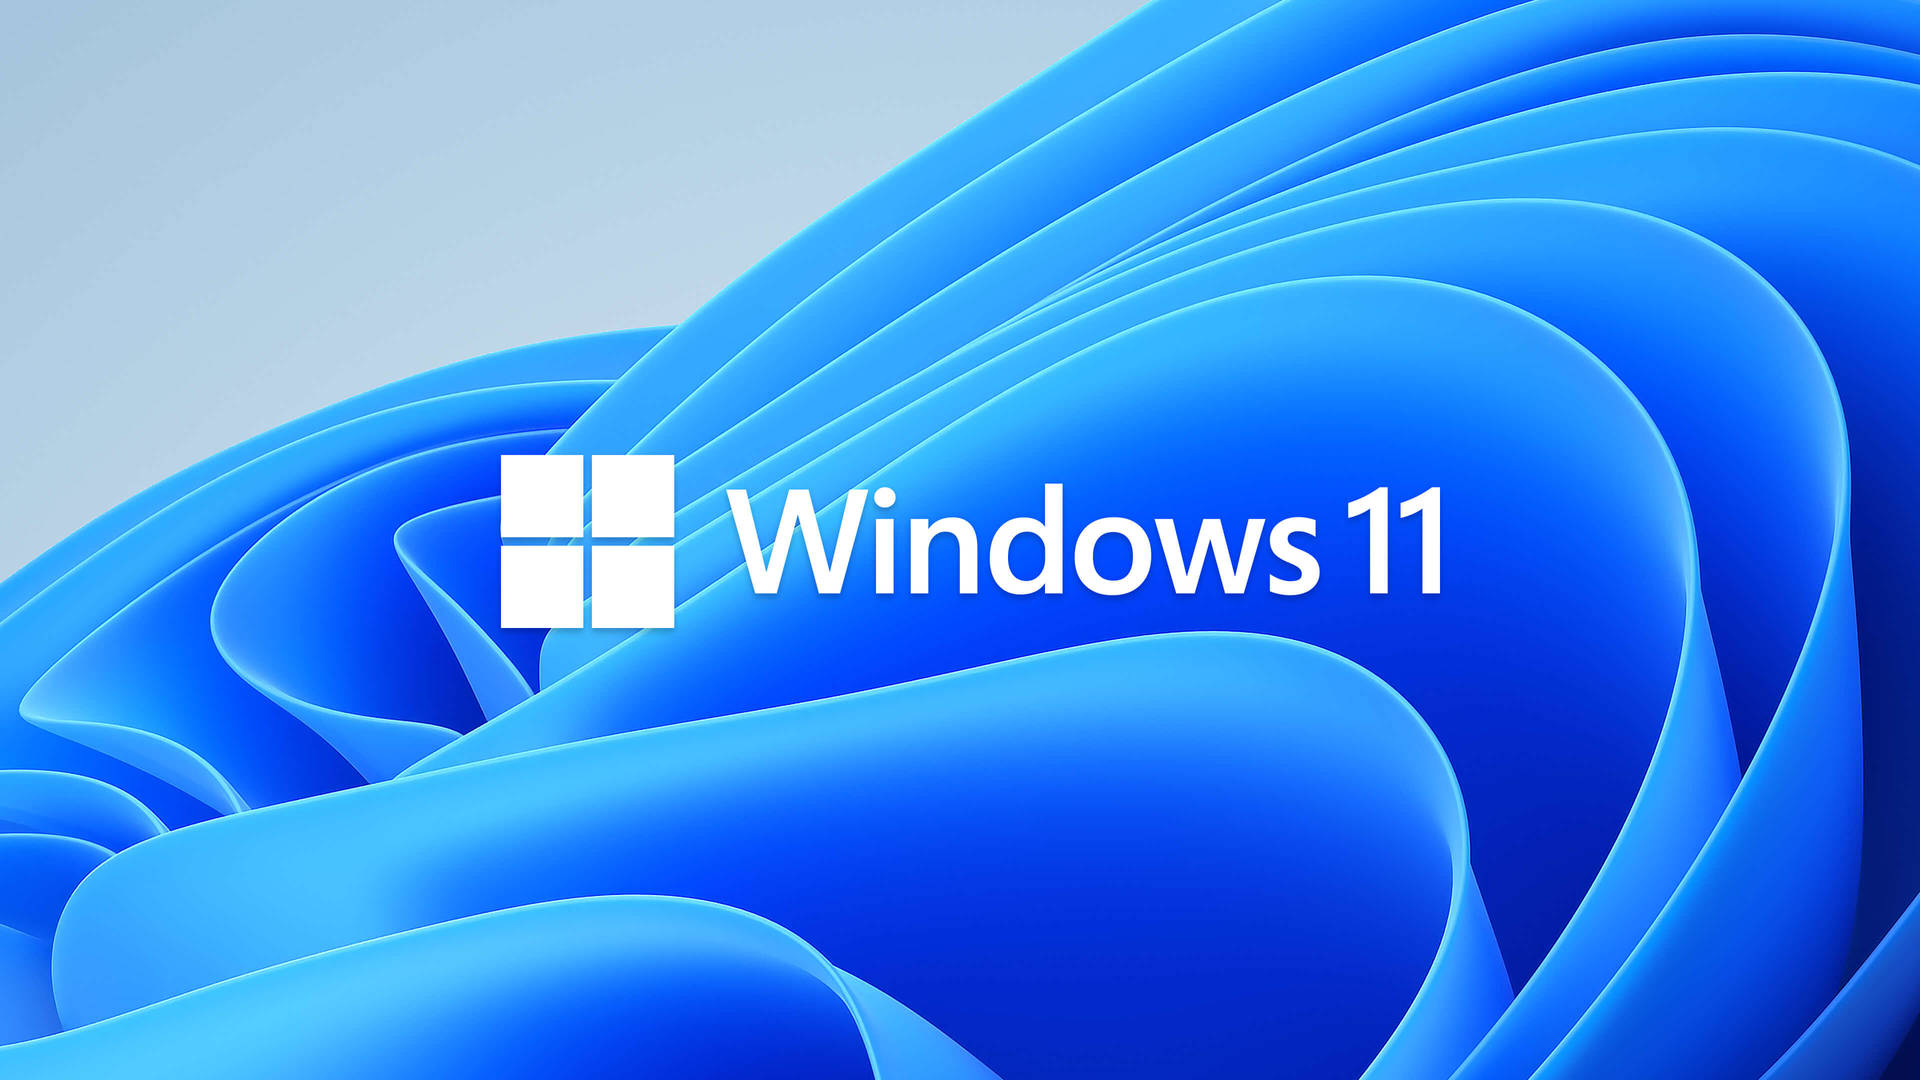 Twitter 上的WindowsThanks a billion to everyone using Windows 10 Put 19 of  the top Windows 10 Wallpapers on your desktop in stunning 4k images  exclusive for Windows 10 Themes httpstcoAZgcUCz0dt  httpstcocmIa0T8KoN 